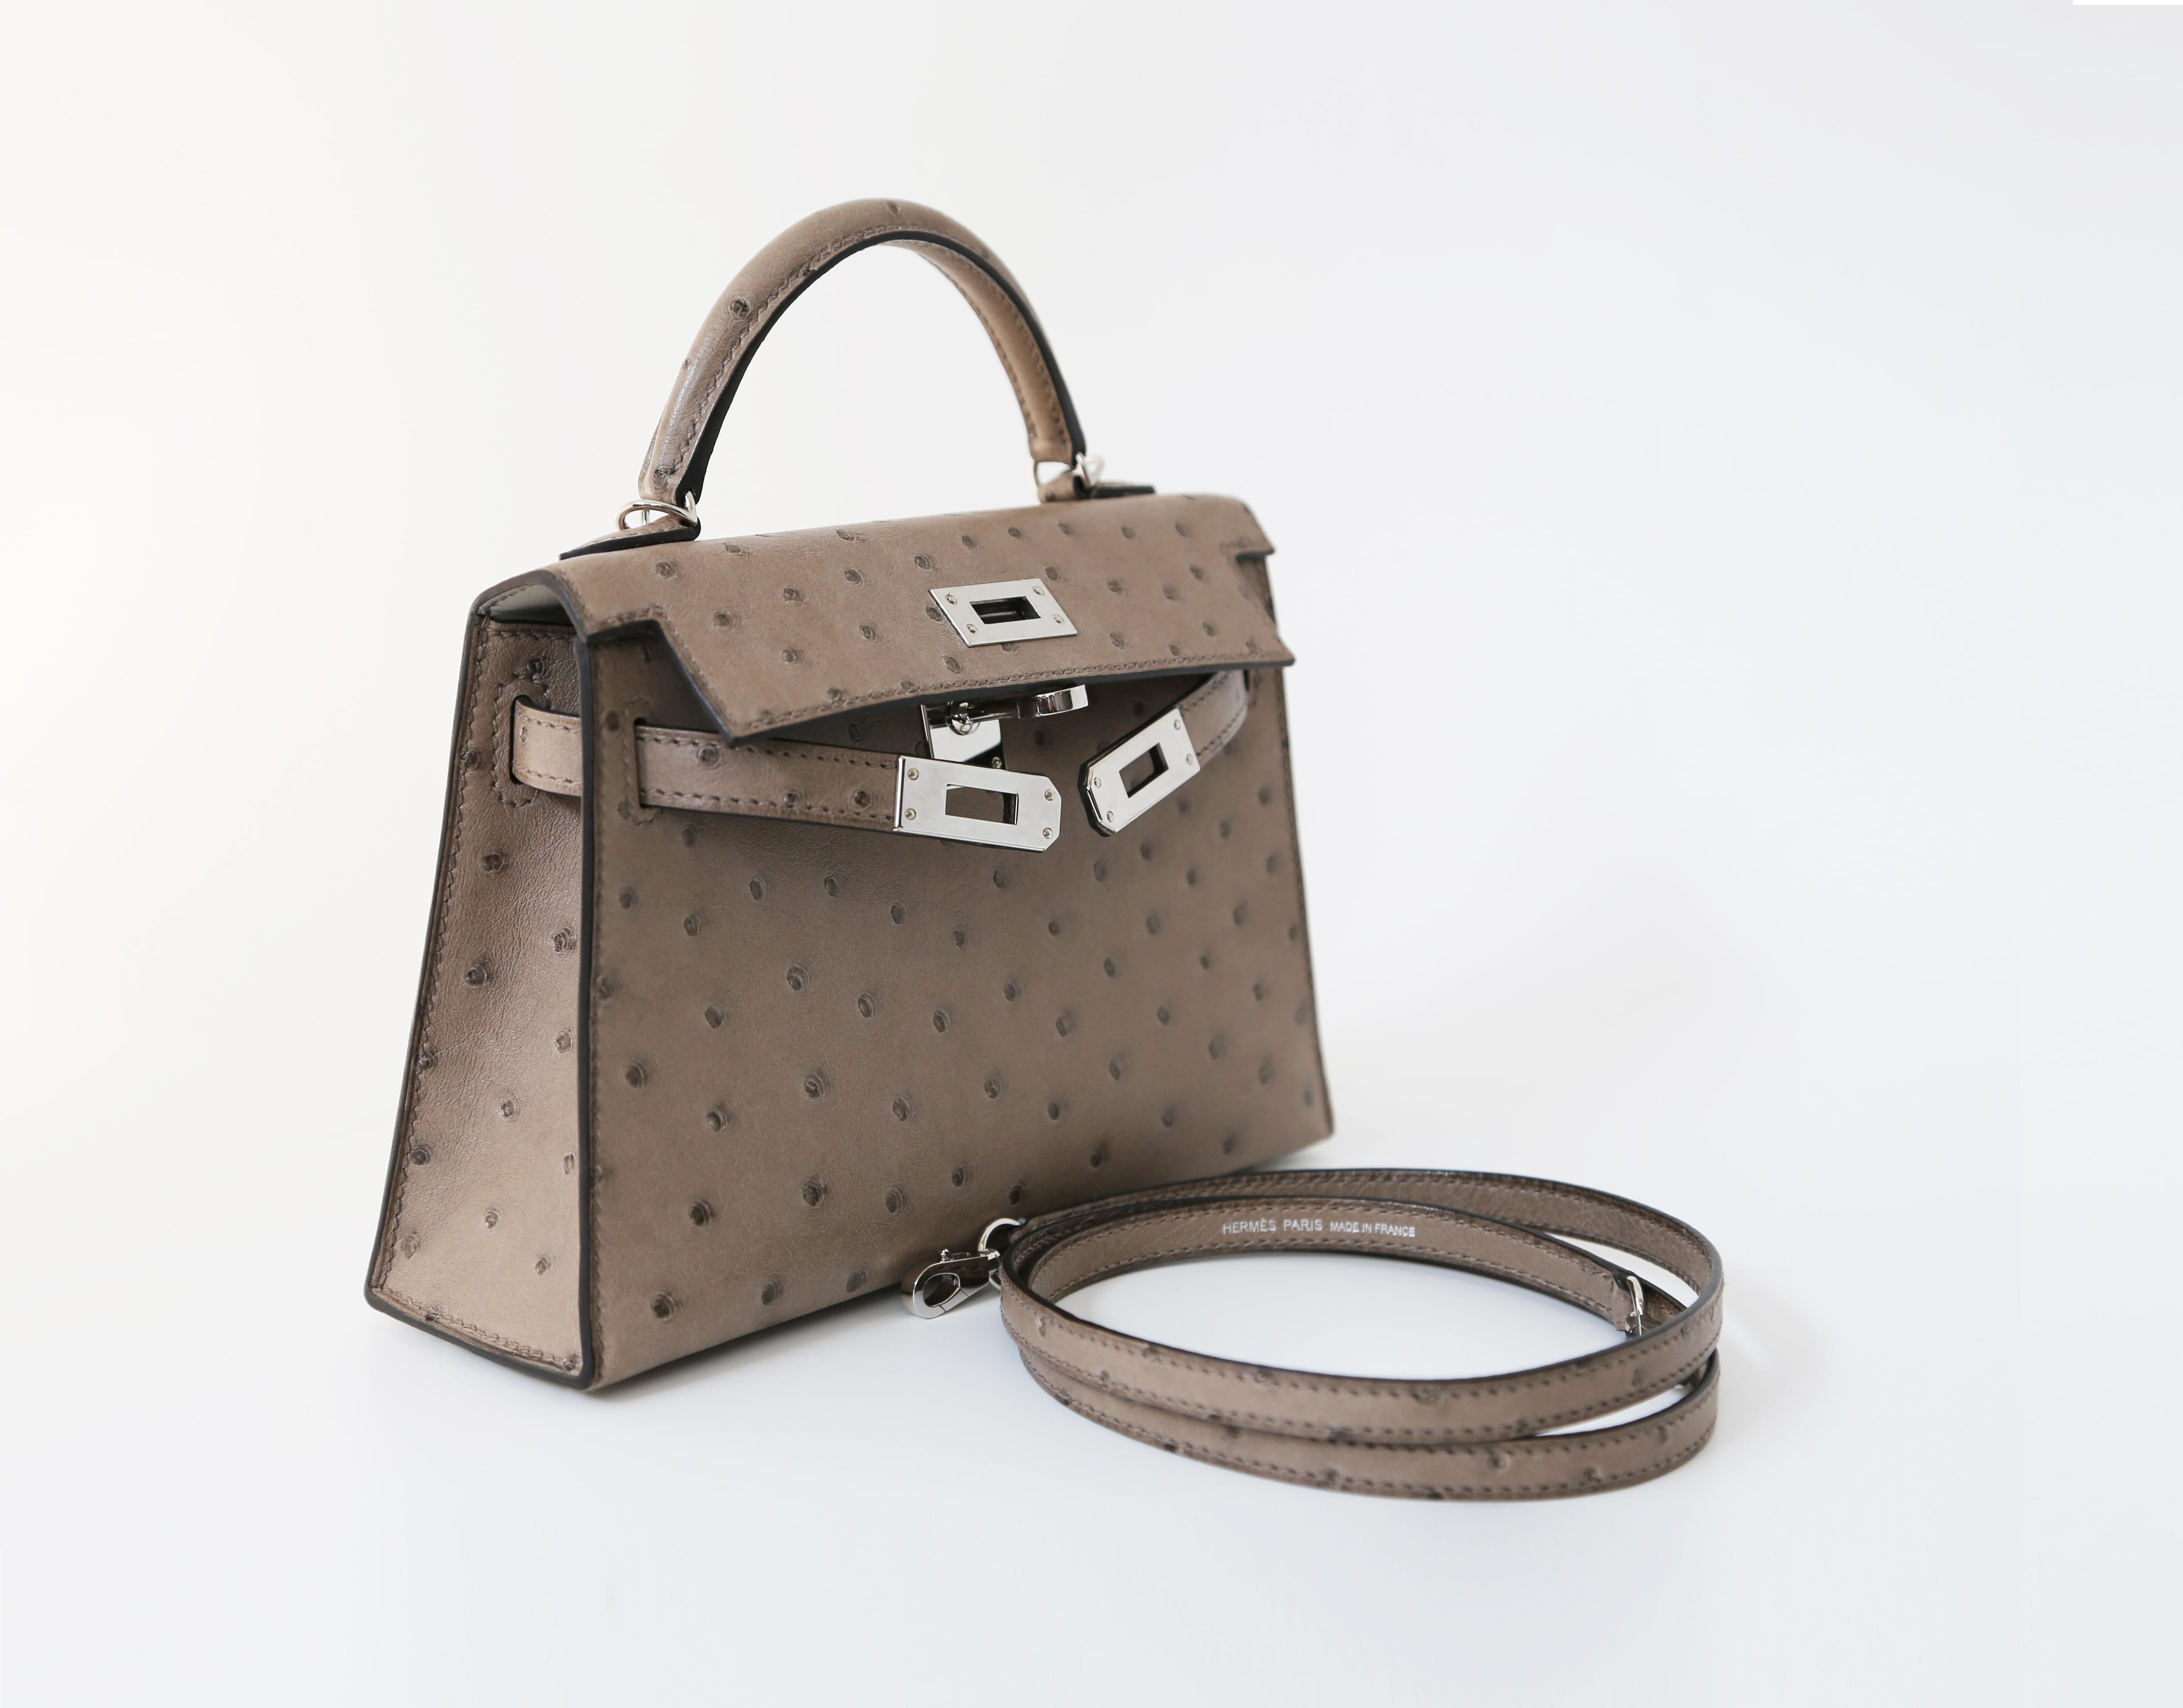 The Kelly bag got its name in 1997 from Grace Kelly, the princess of Monaco, and is one of the most sought-after styles in the world. Meticulously crafted by a skilled artisan, the Kelly bag can take over 18–24 hours to be assembled. A one-of-a-kind